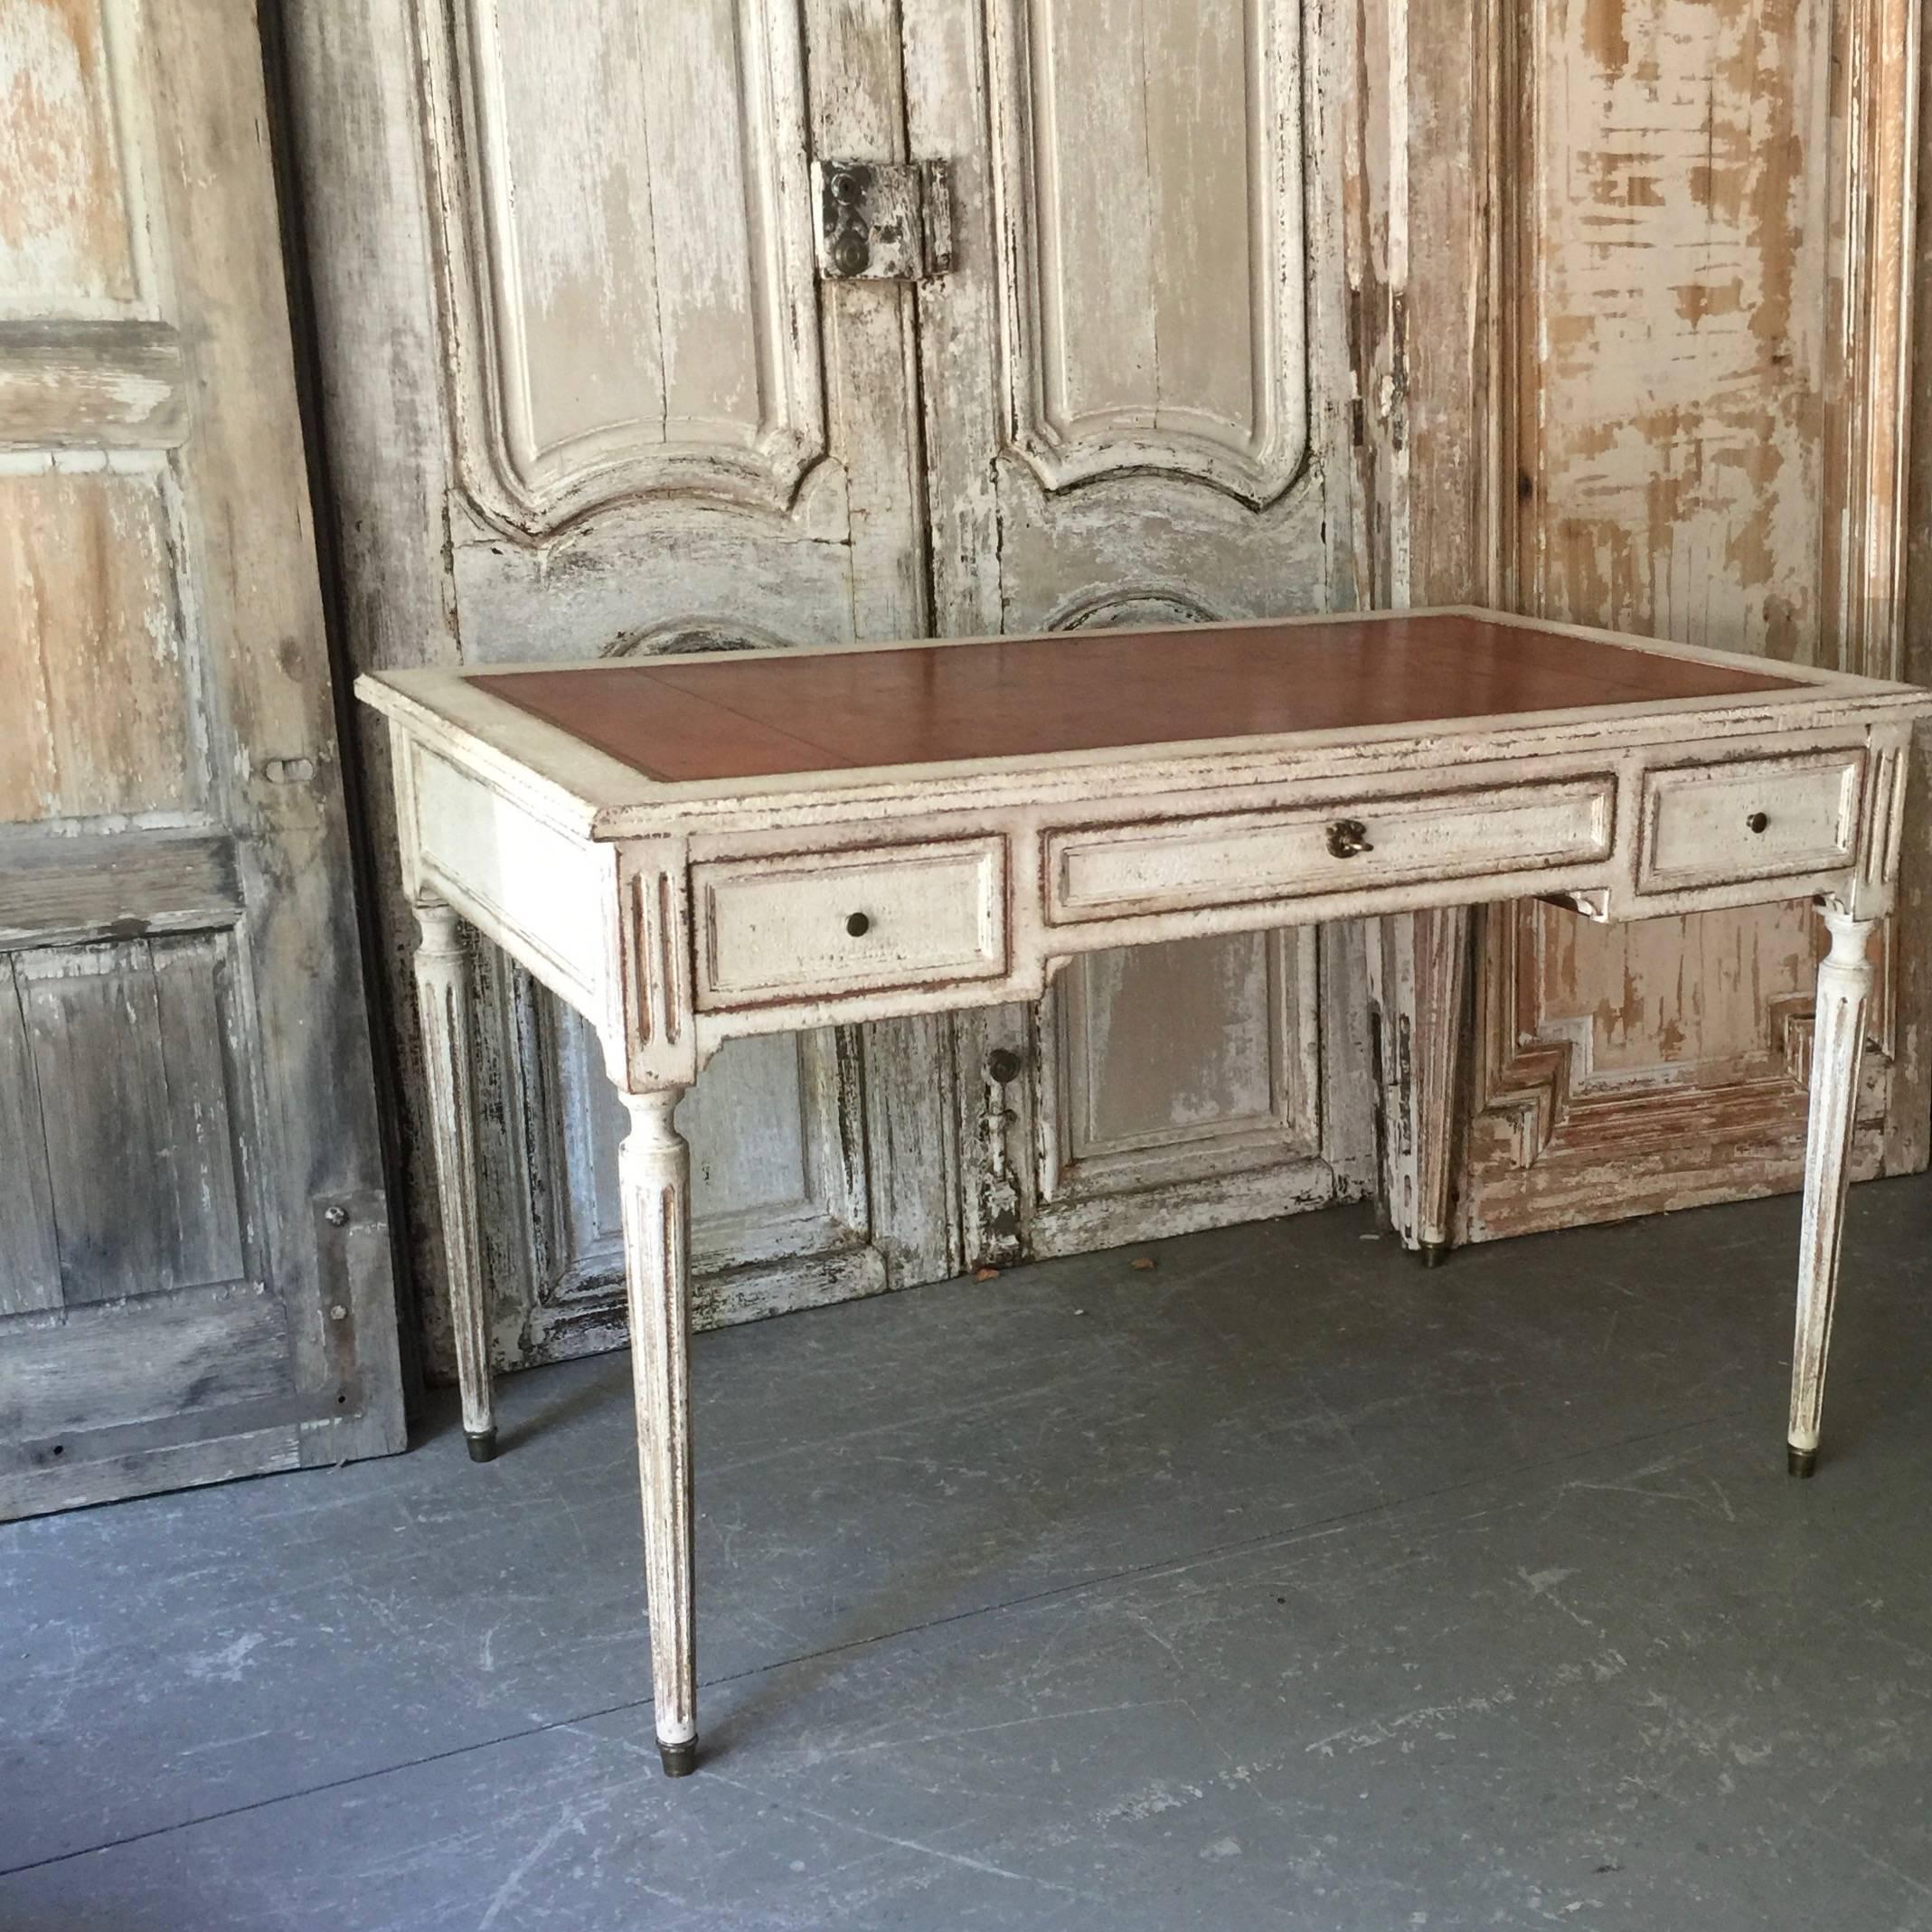 Elegant 19th century French Louis XVI style Bureaux plat with drawers and leather top with nicely stamped and gold leafed embossing design. The back of the desk is trimmed to match the front in faux partner desk style.
Kneehole: 24” H.
France,